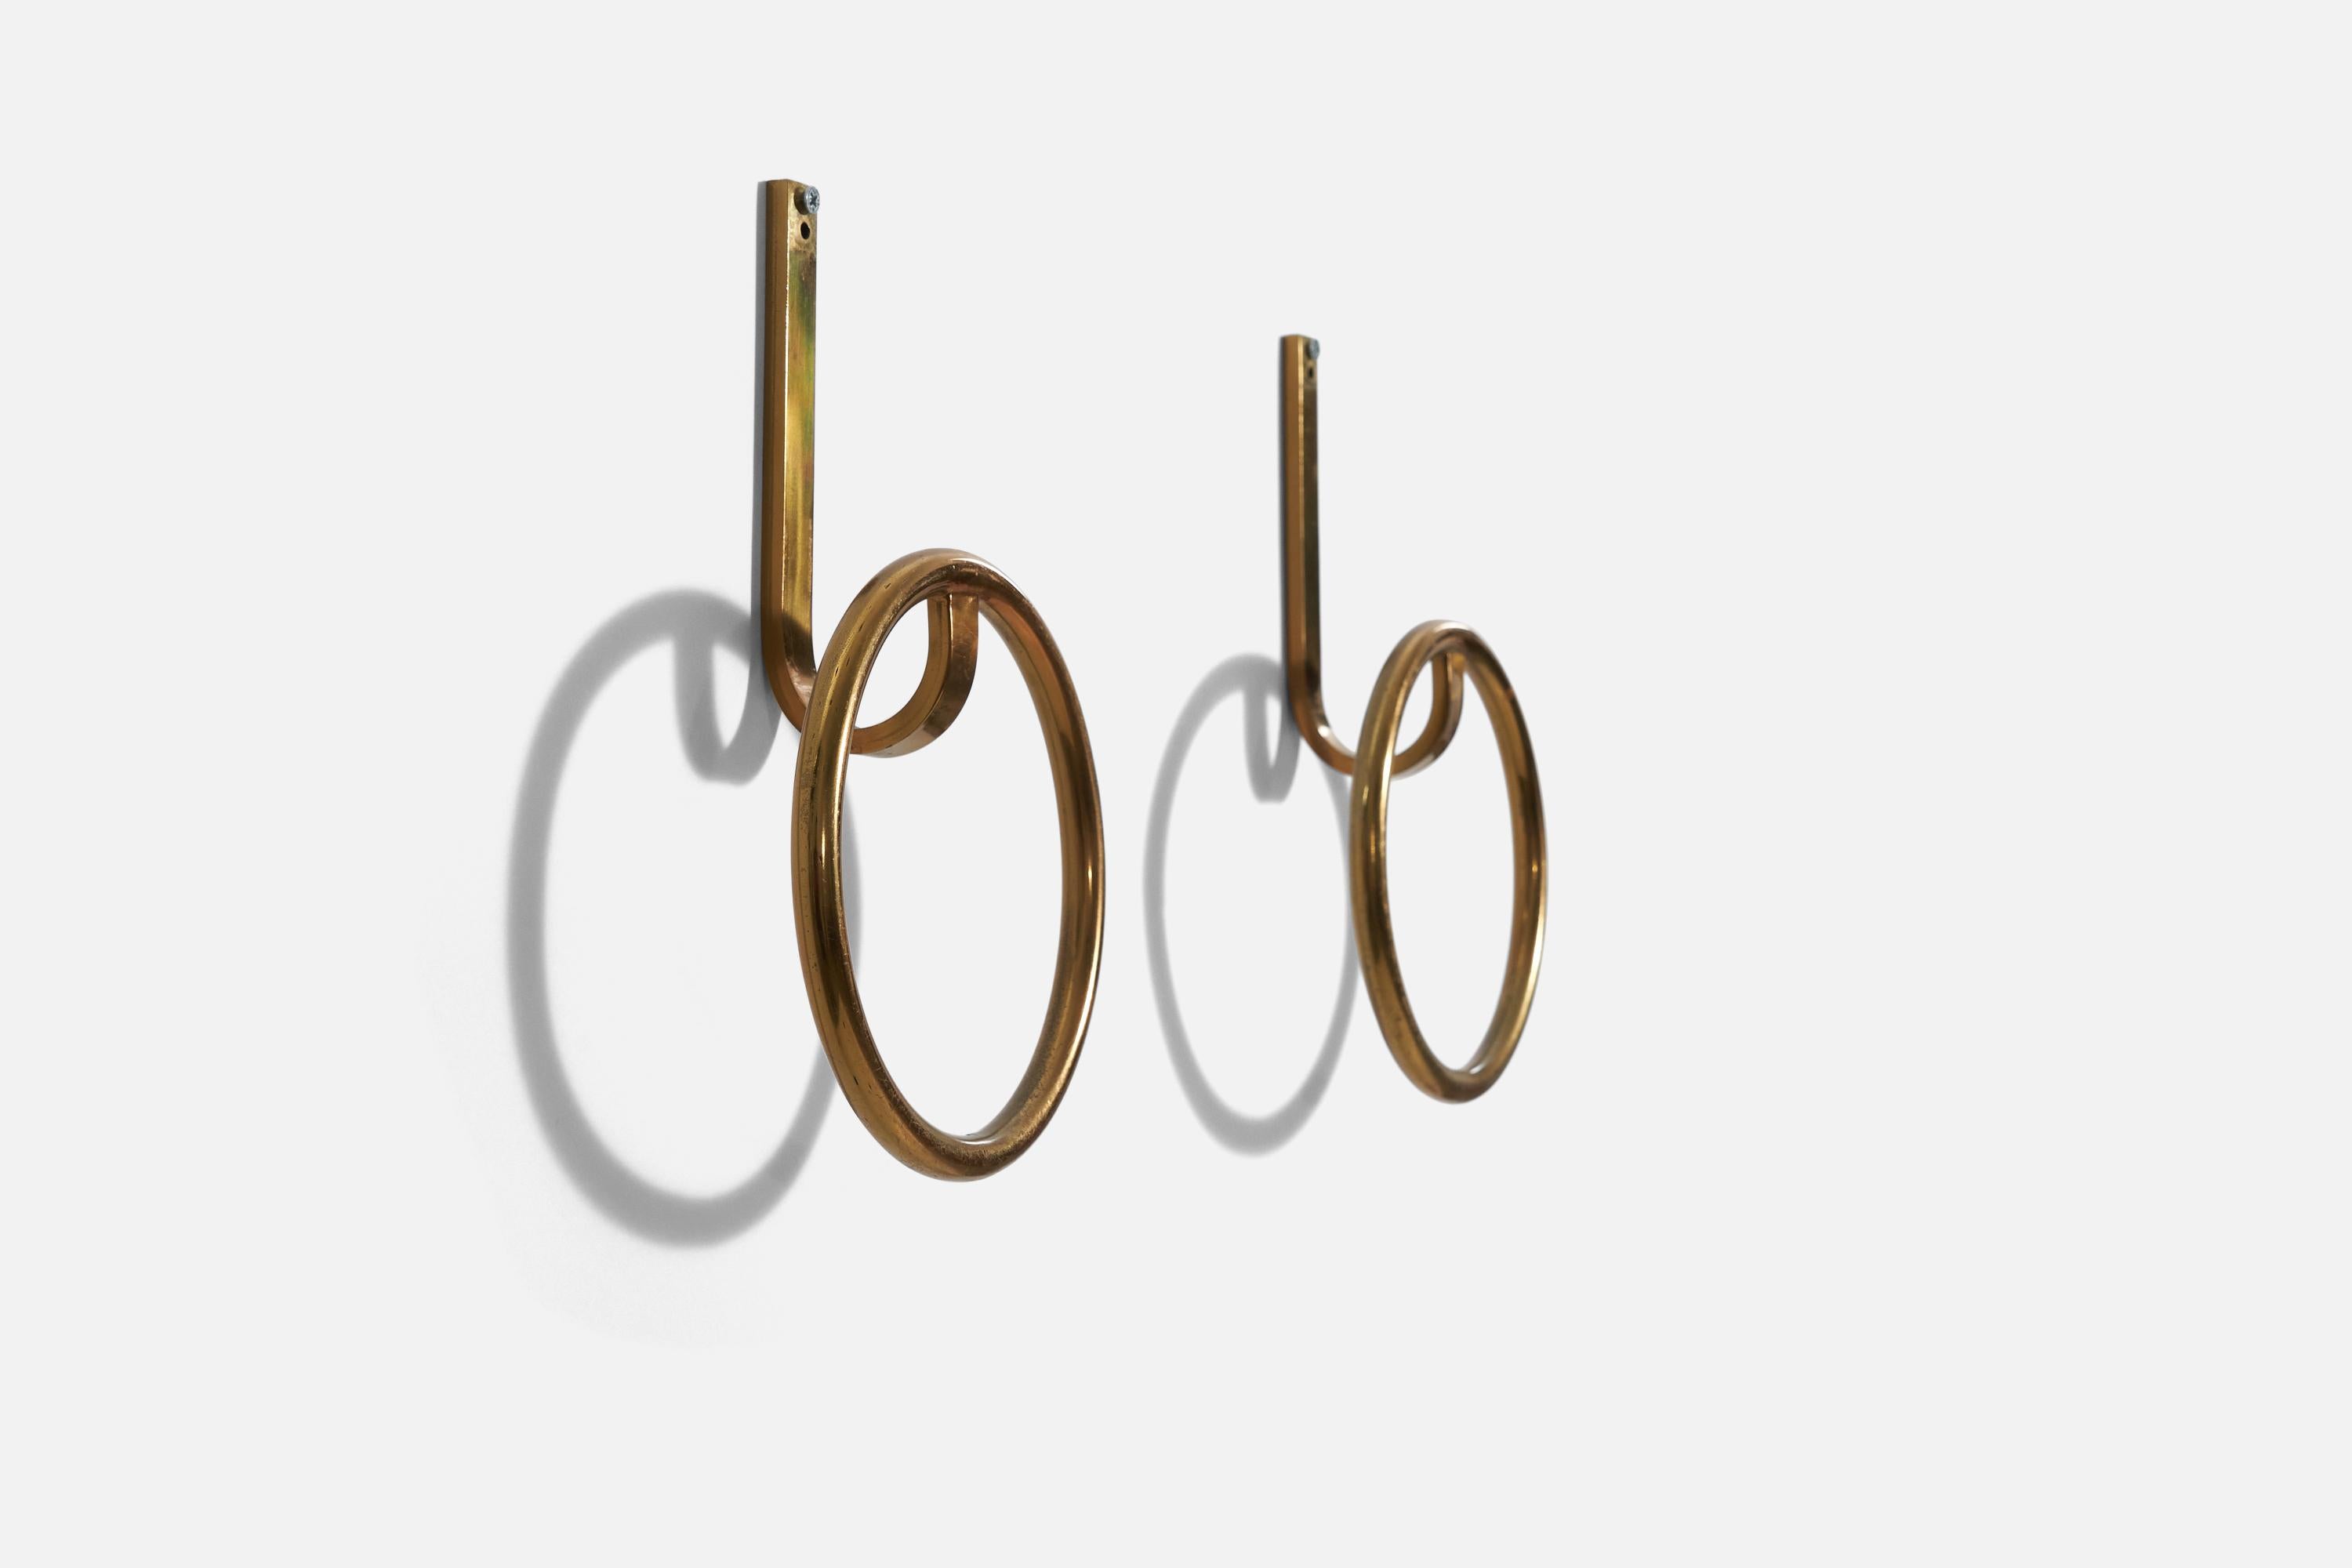 A pair of brass coat hangers, designed and produced by an Italian designer, Italy, 1950s.

